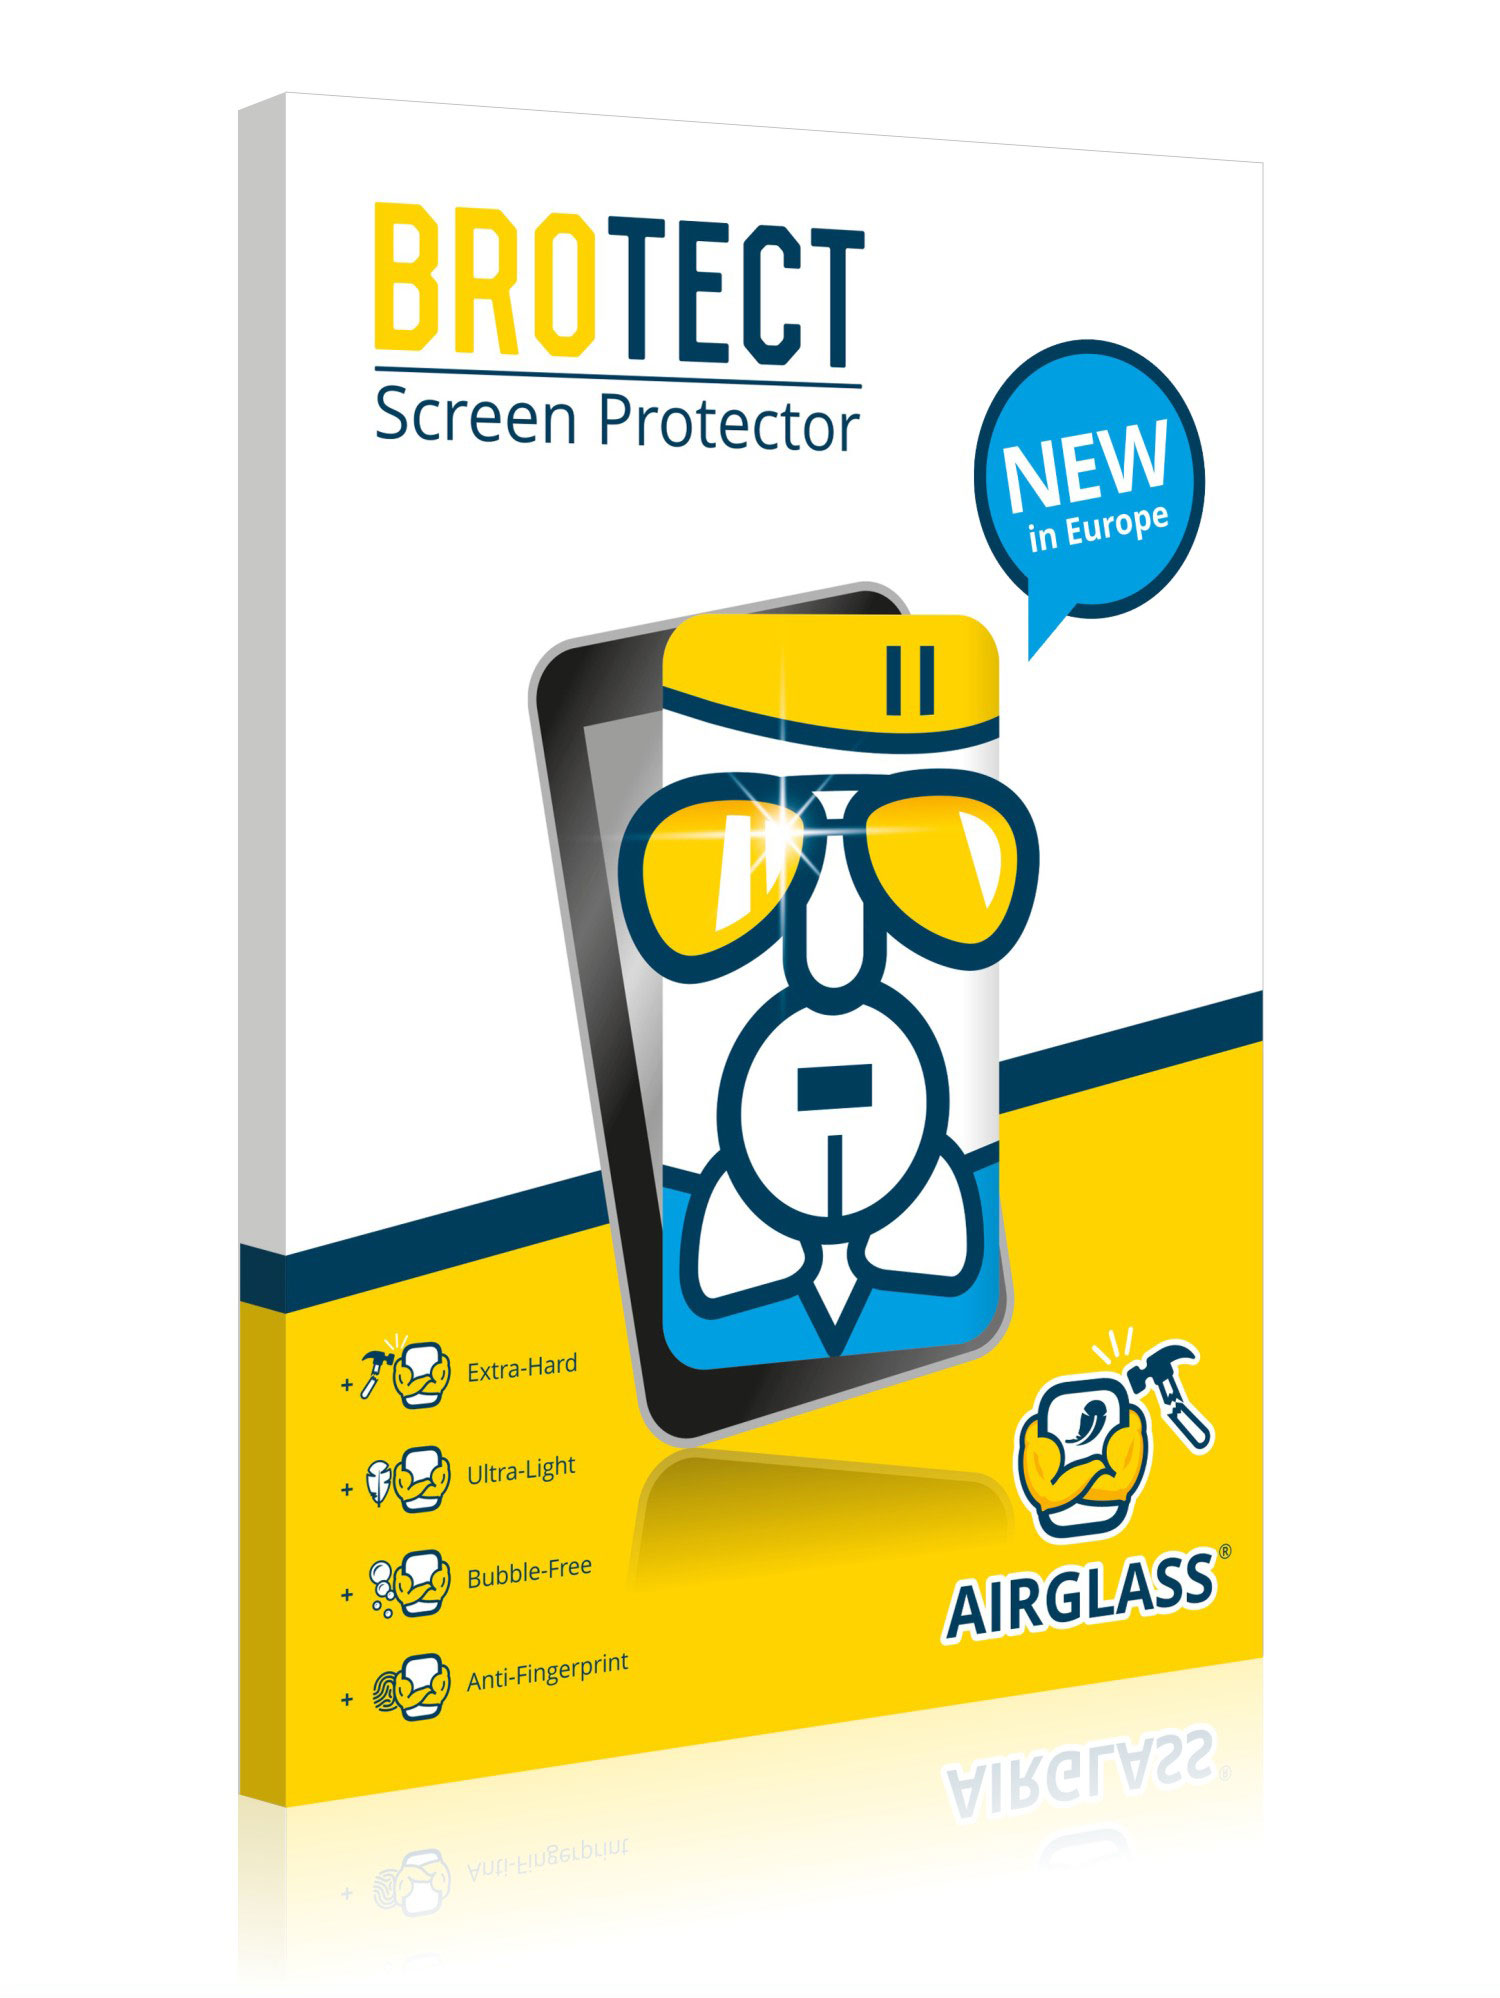 14.1 inch AirGlass brotect Glass Screen Protector for Laptops - 9H Glass Protector 312 mm x 176 mm, 16:9